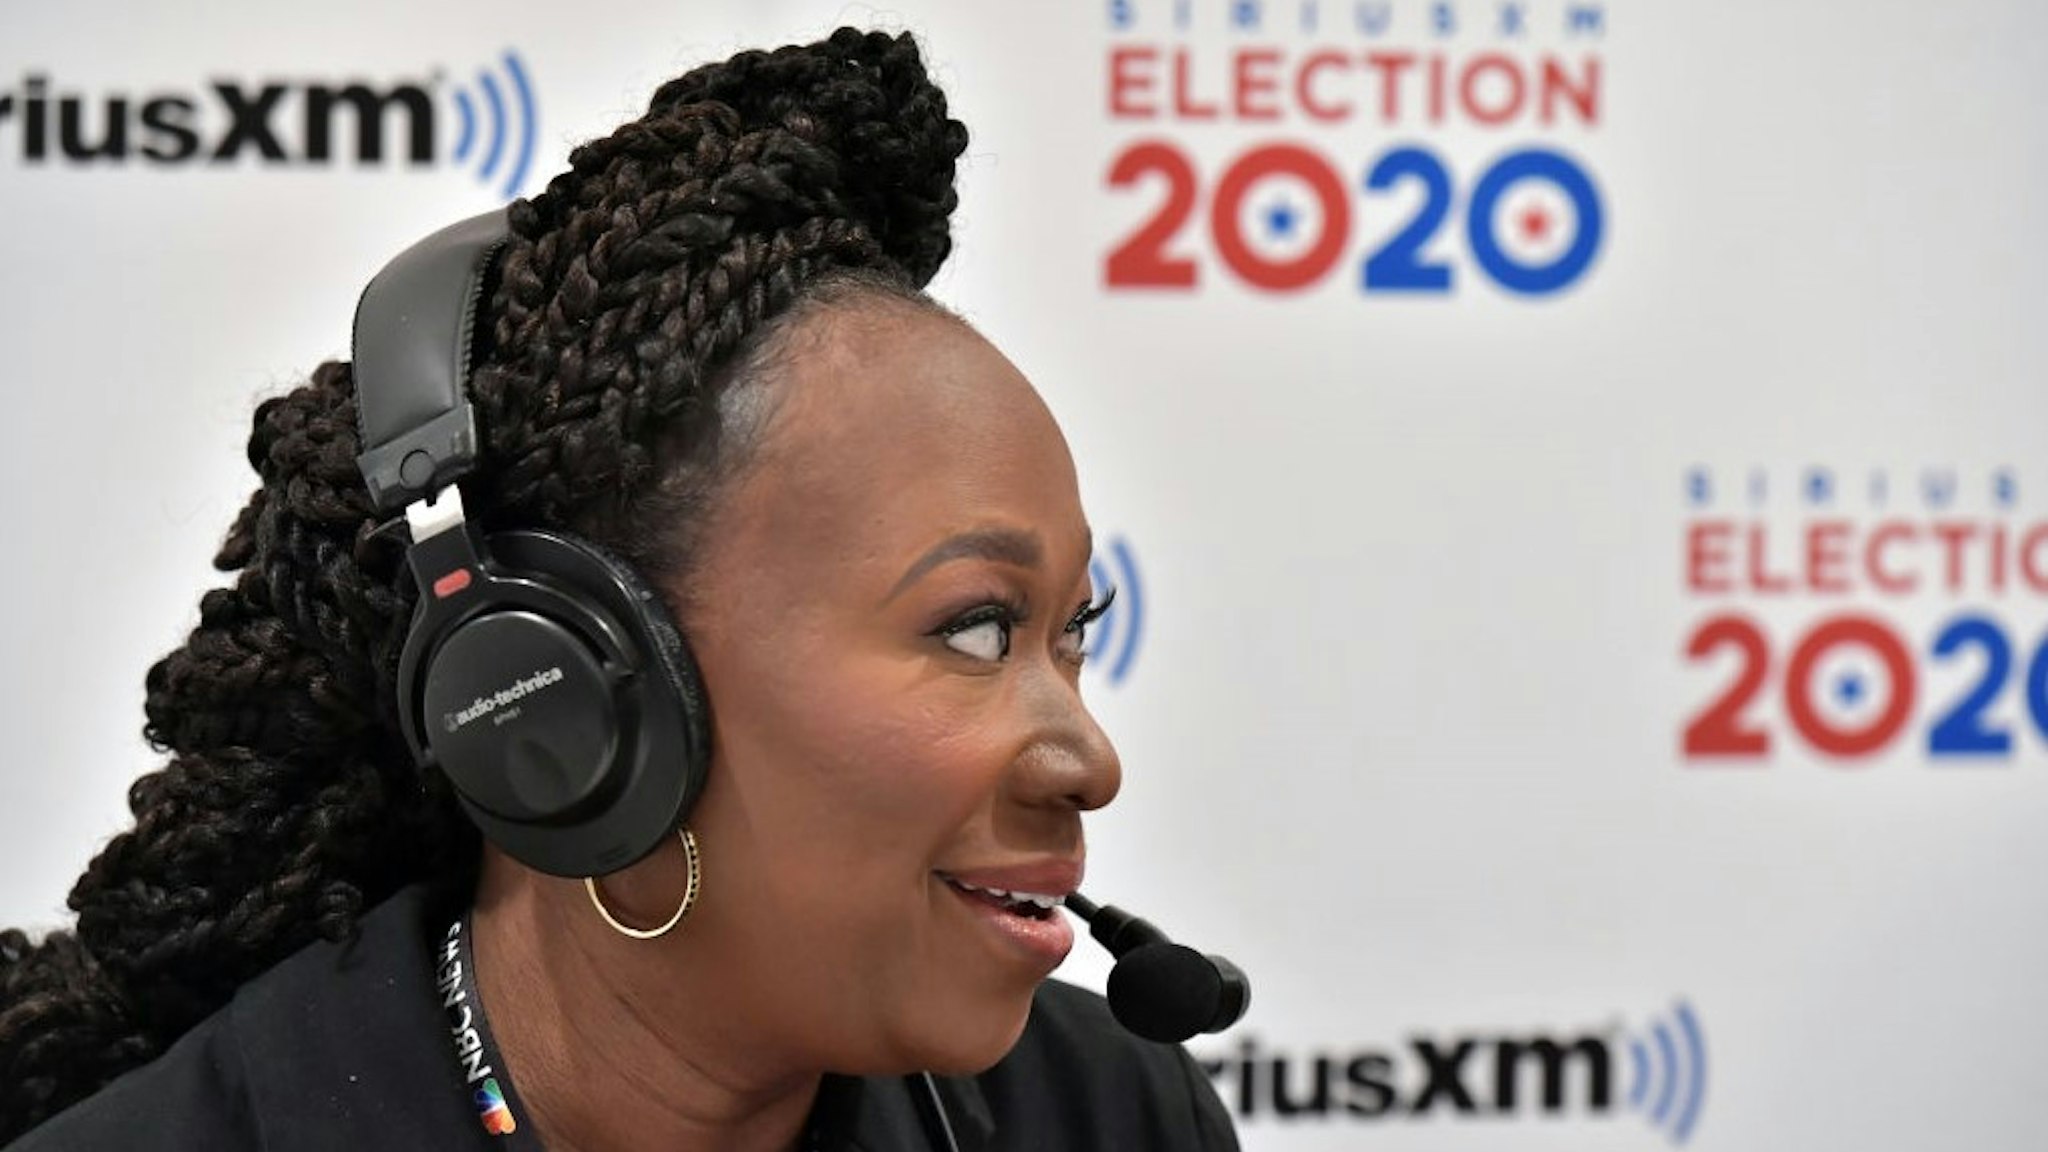 MANCHESTER, NH - FEBRUARY 10: Sirius XM on air host Dean Obeidallah interviews MSNBC's Joy Reid at the DoubleTree by Hilton on February 10, 2020 in Manchester, New Hampshire. (Photo by